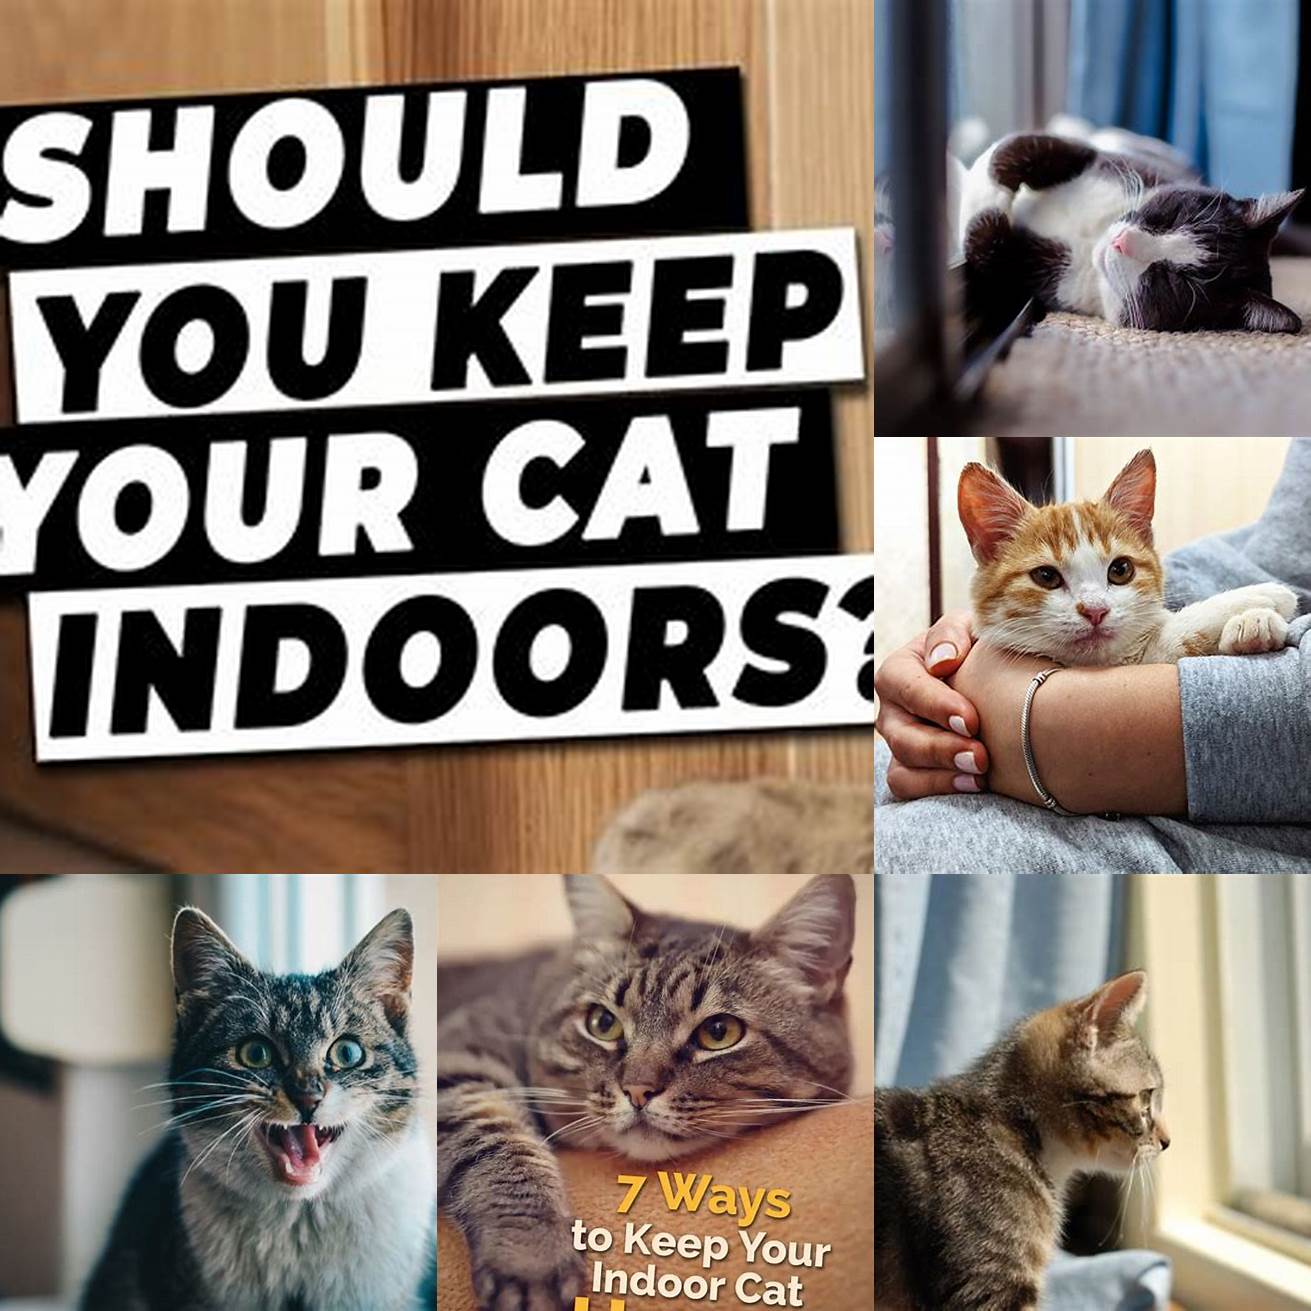 Keep your cat indoors If you live in an area with a high number of stray dogs consider keeping your cat indoors